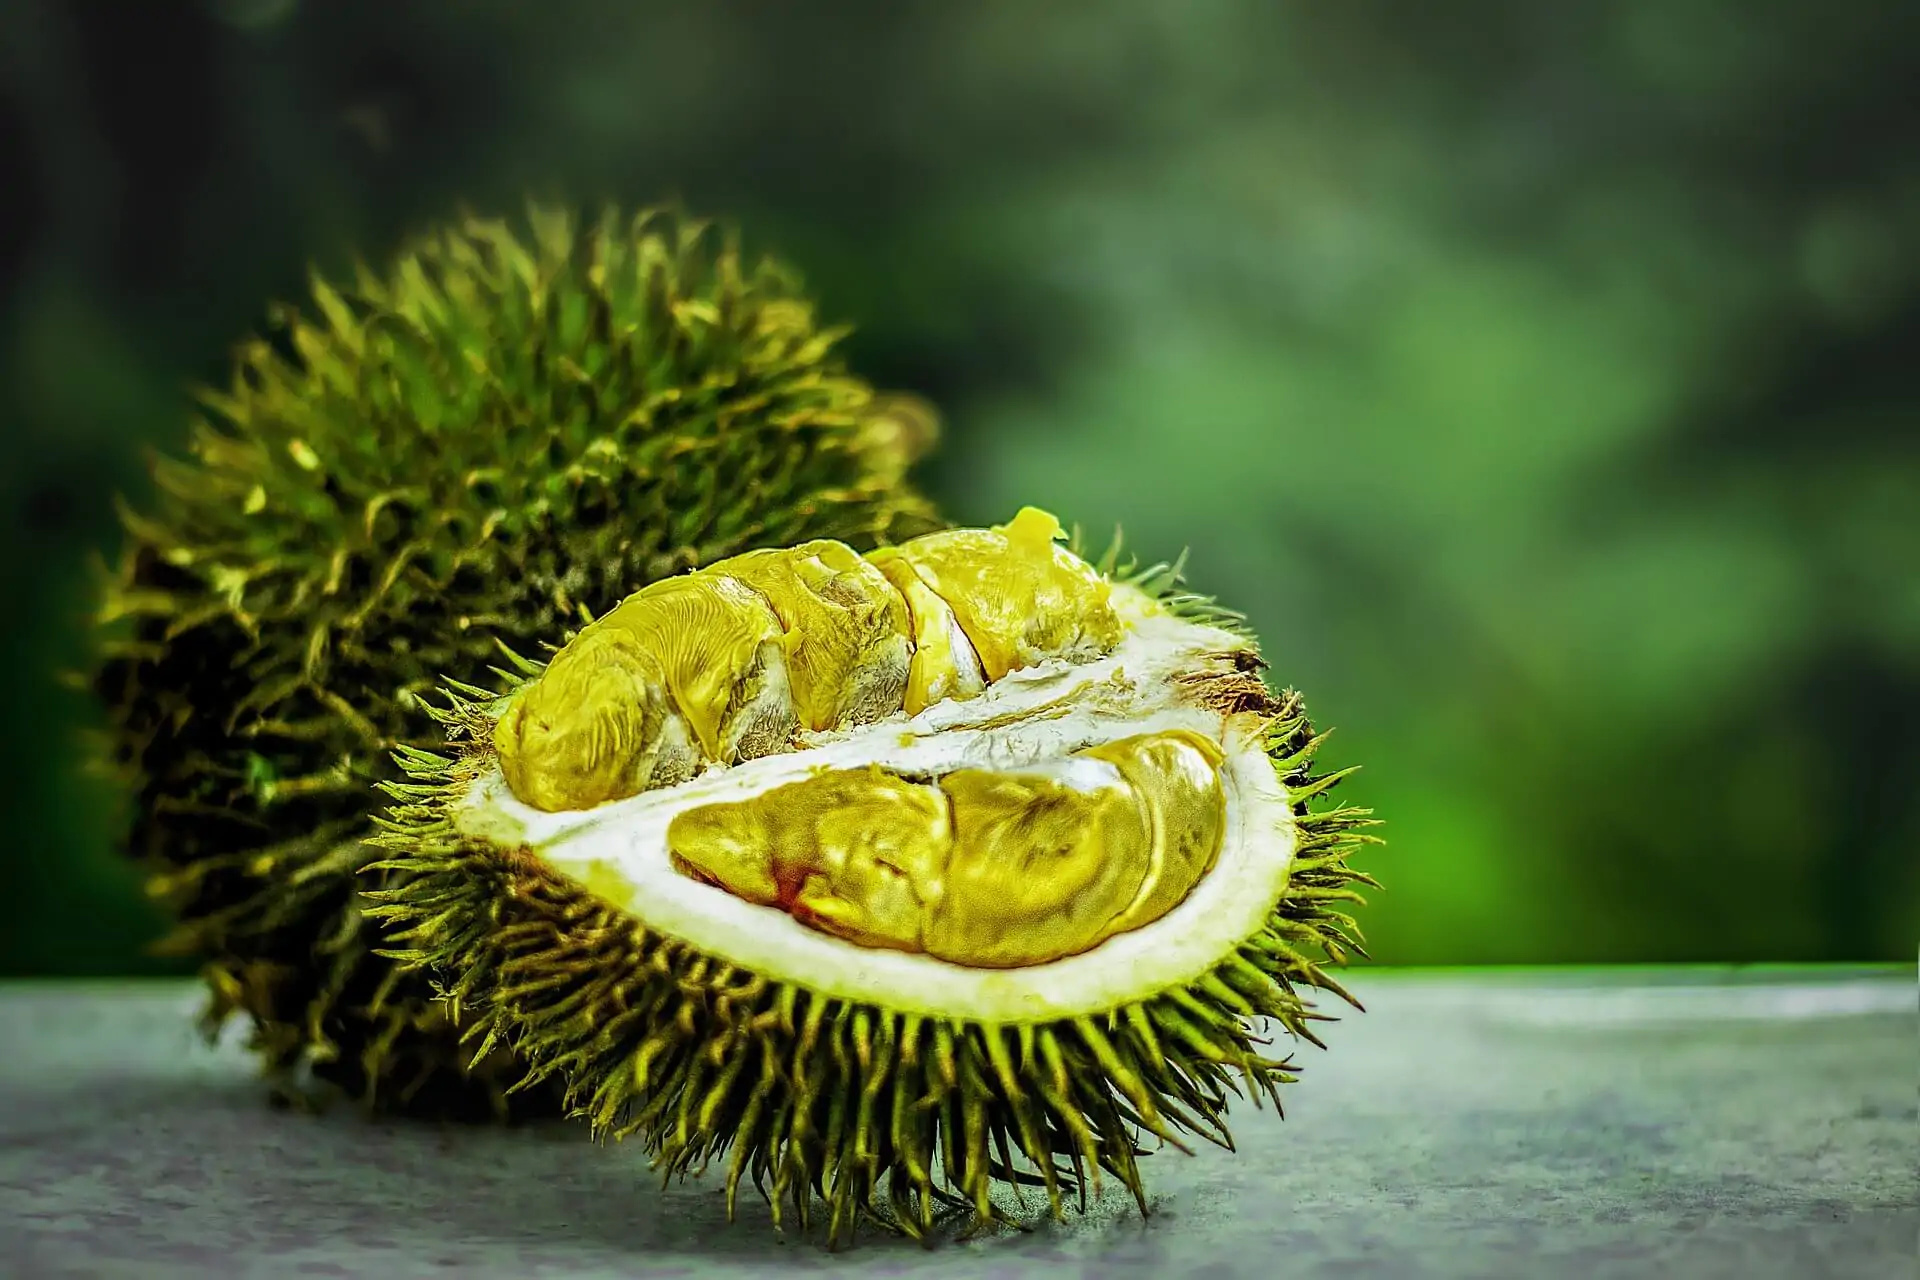 Durian: Used in various desserts, candies, and ice creams in Southeast Asia. 1920x1280 HD Wallpaper.